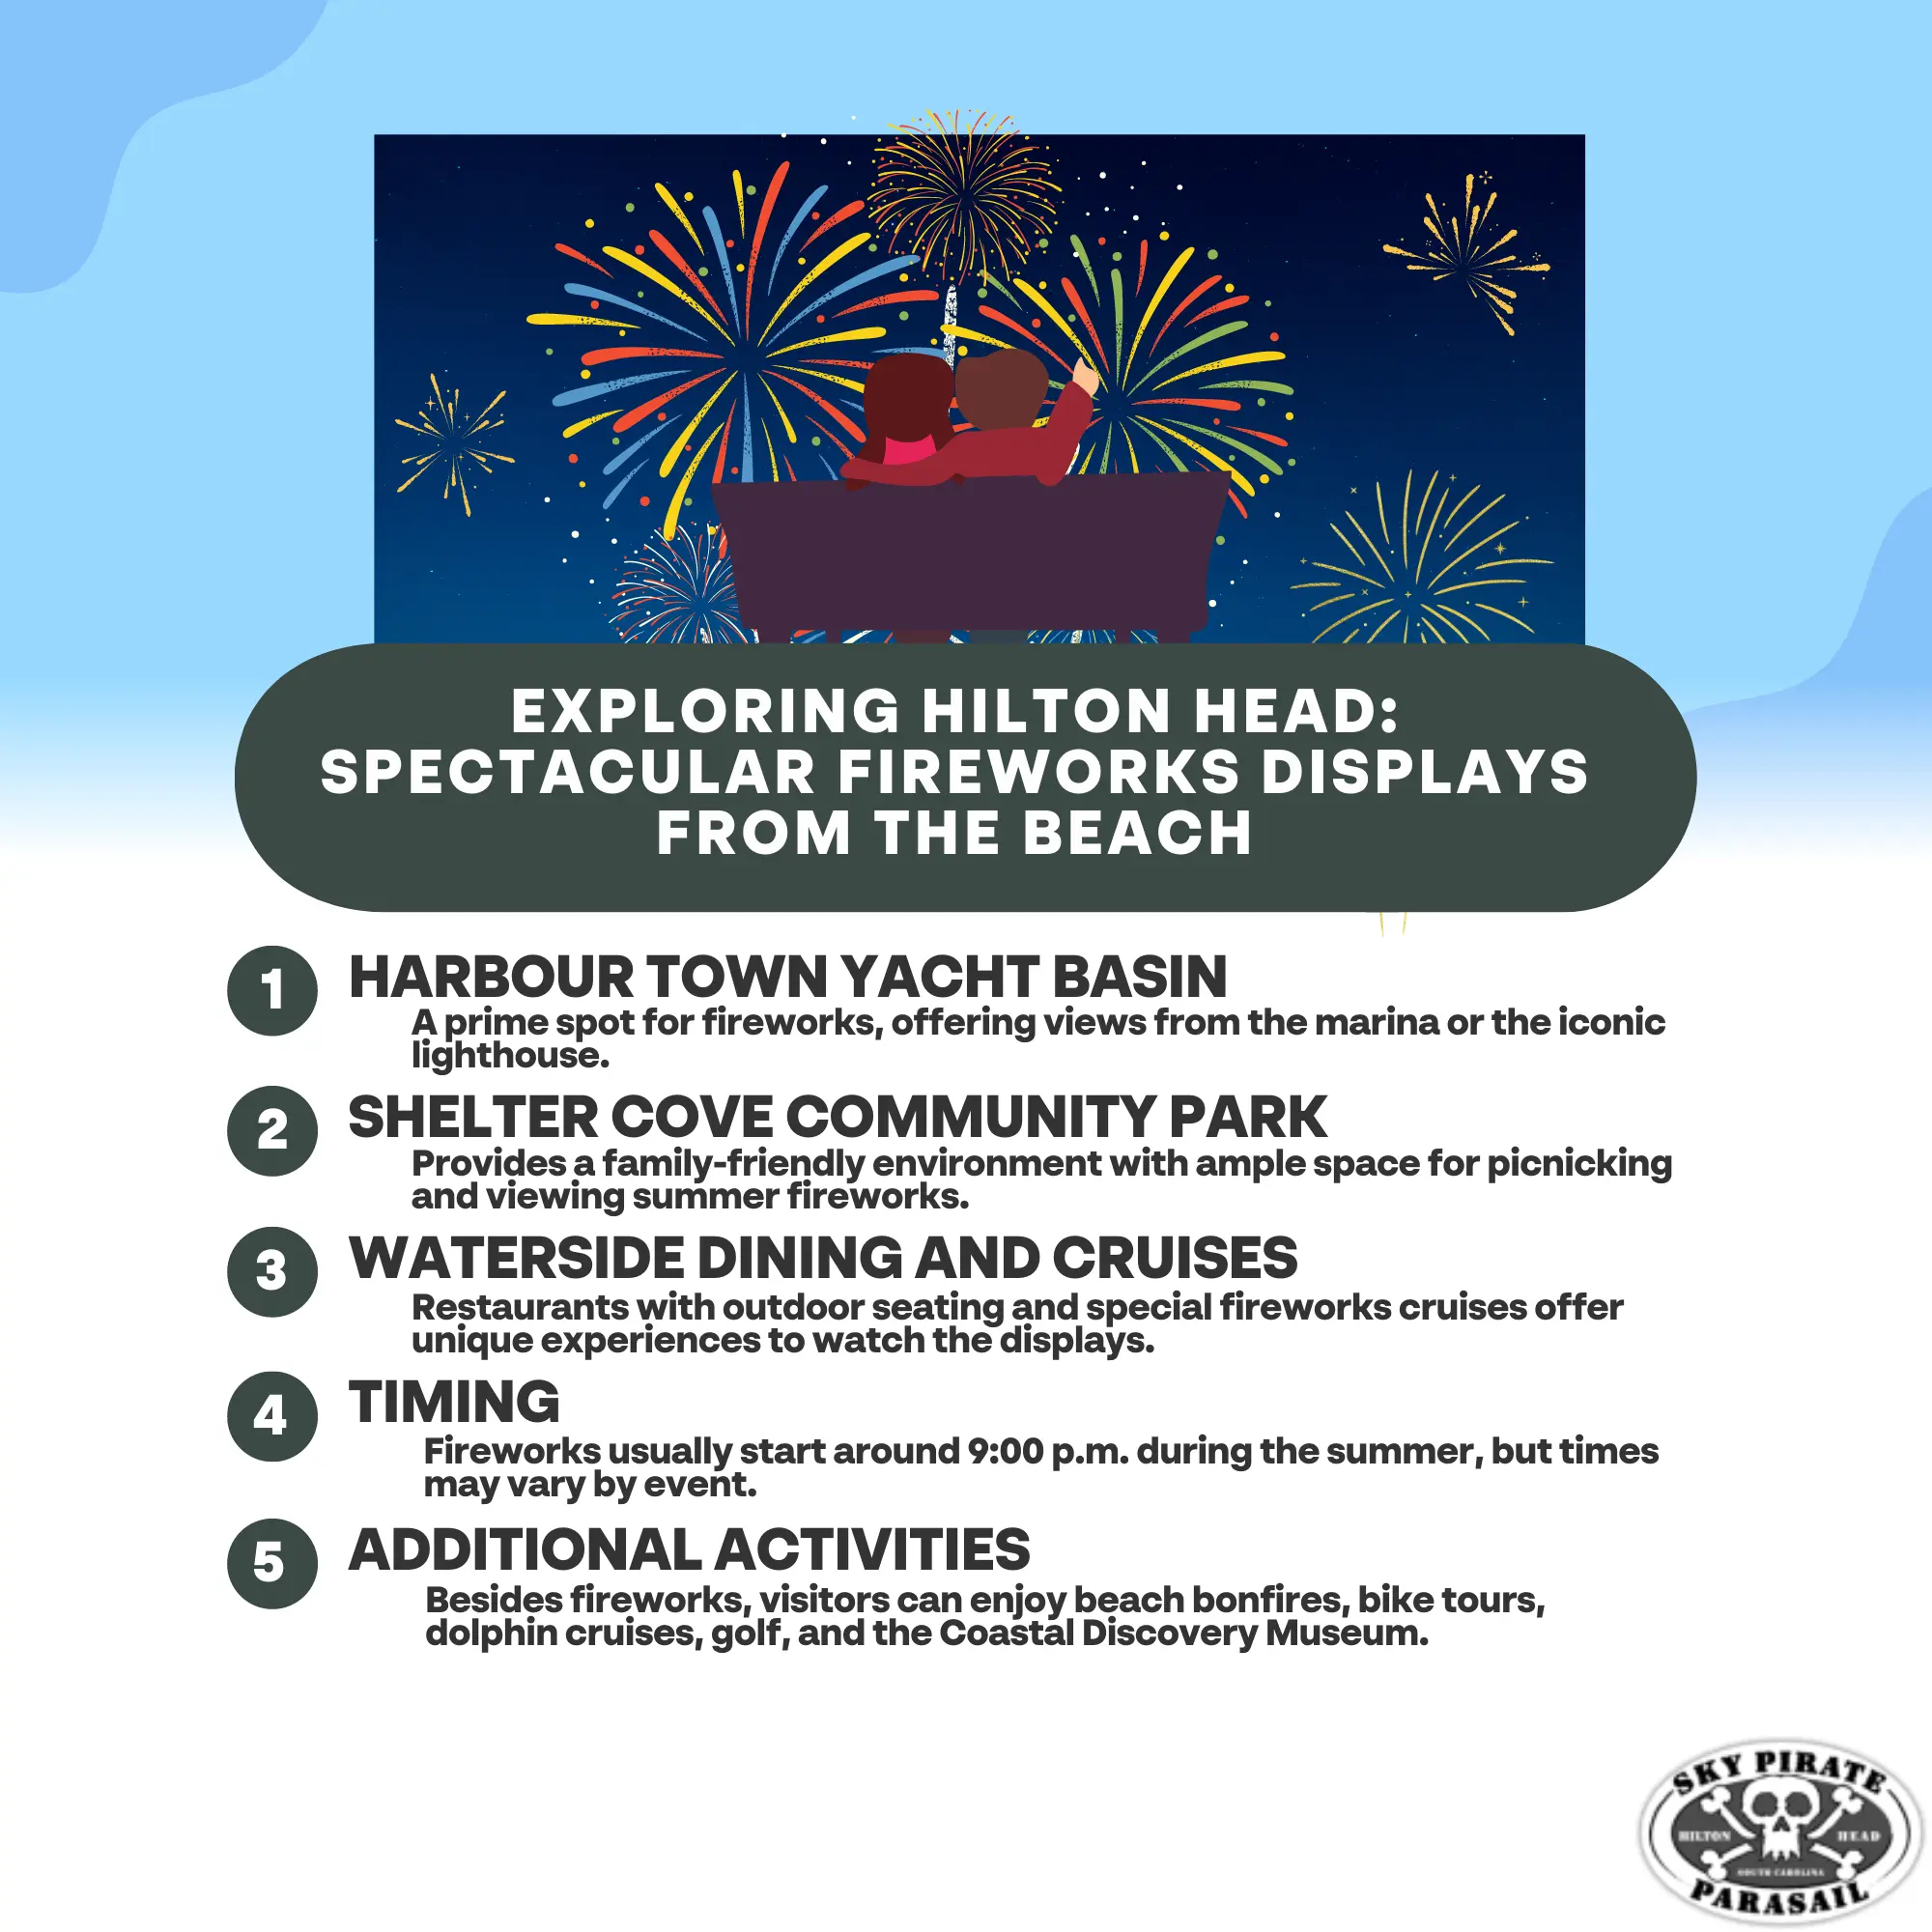 Exploring Hilton Head: Spectacular Fireworks Displays from the Beach | SPP